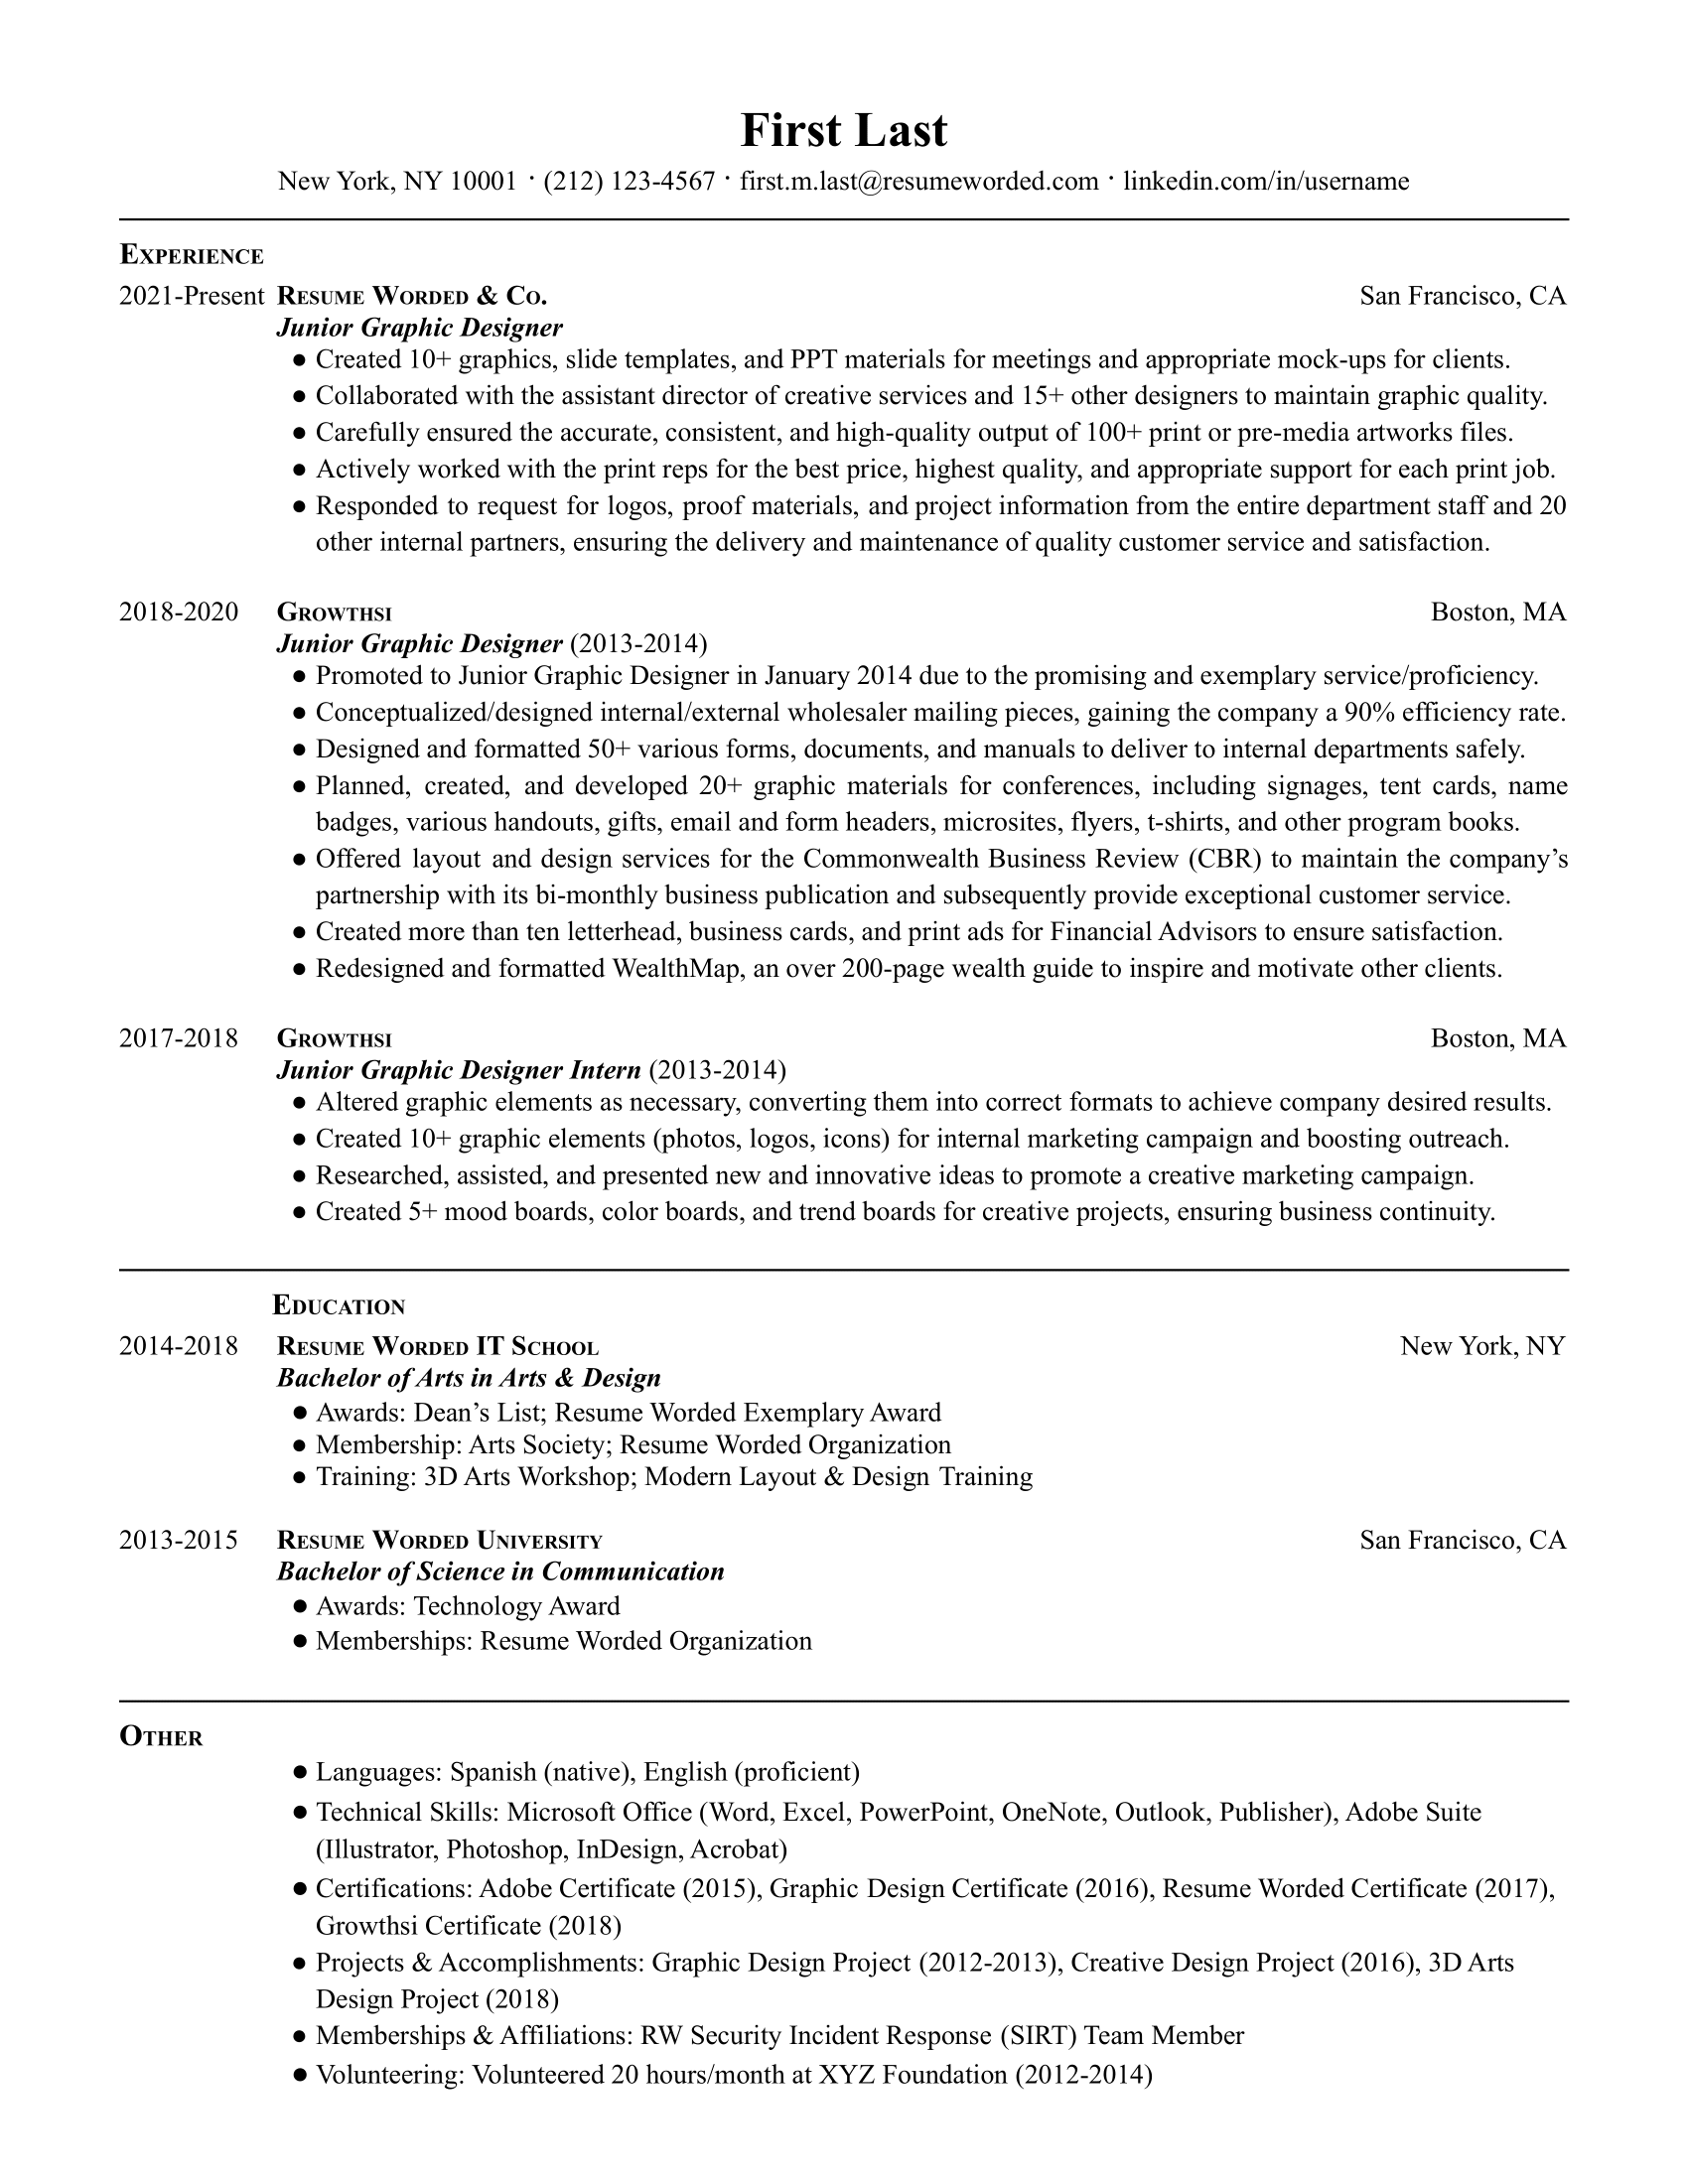 Junior graphic designer resume template example featuring relevant internships and university projects